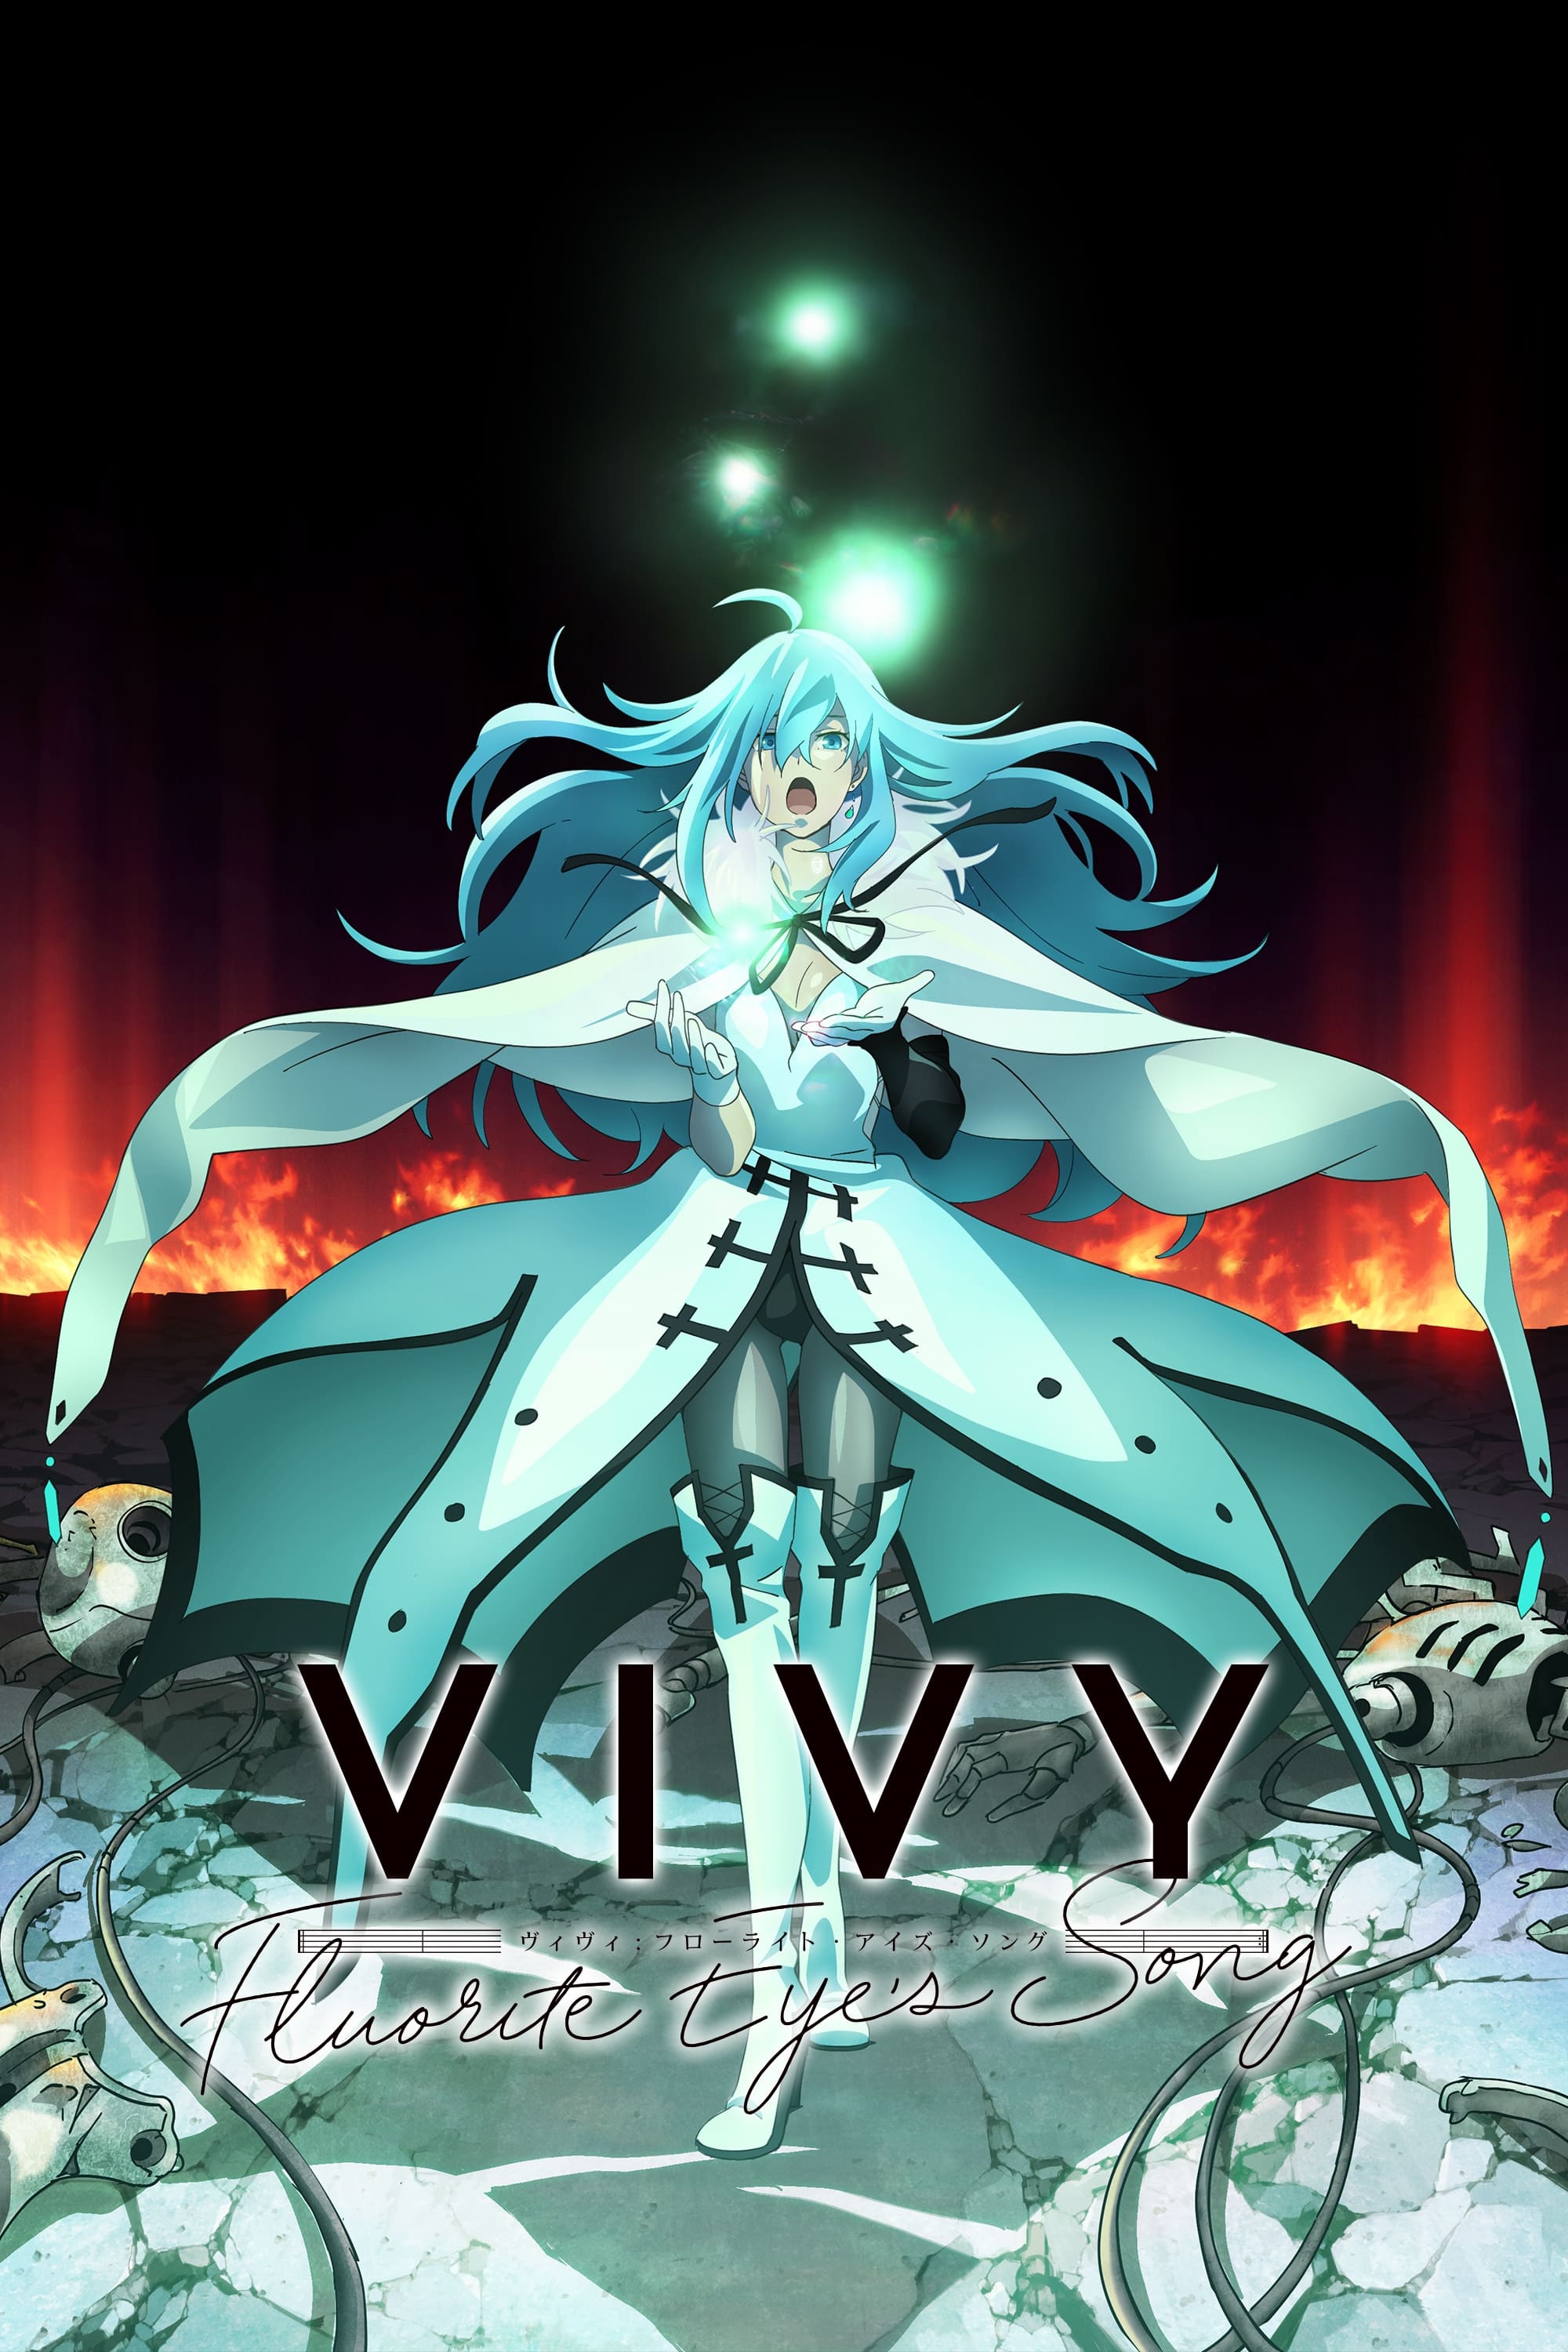 Vivy -Fluorite Eye's Song- TV Shows About Humanoid Robot